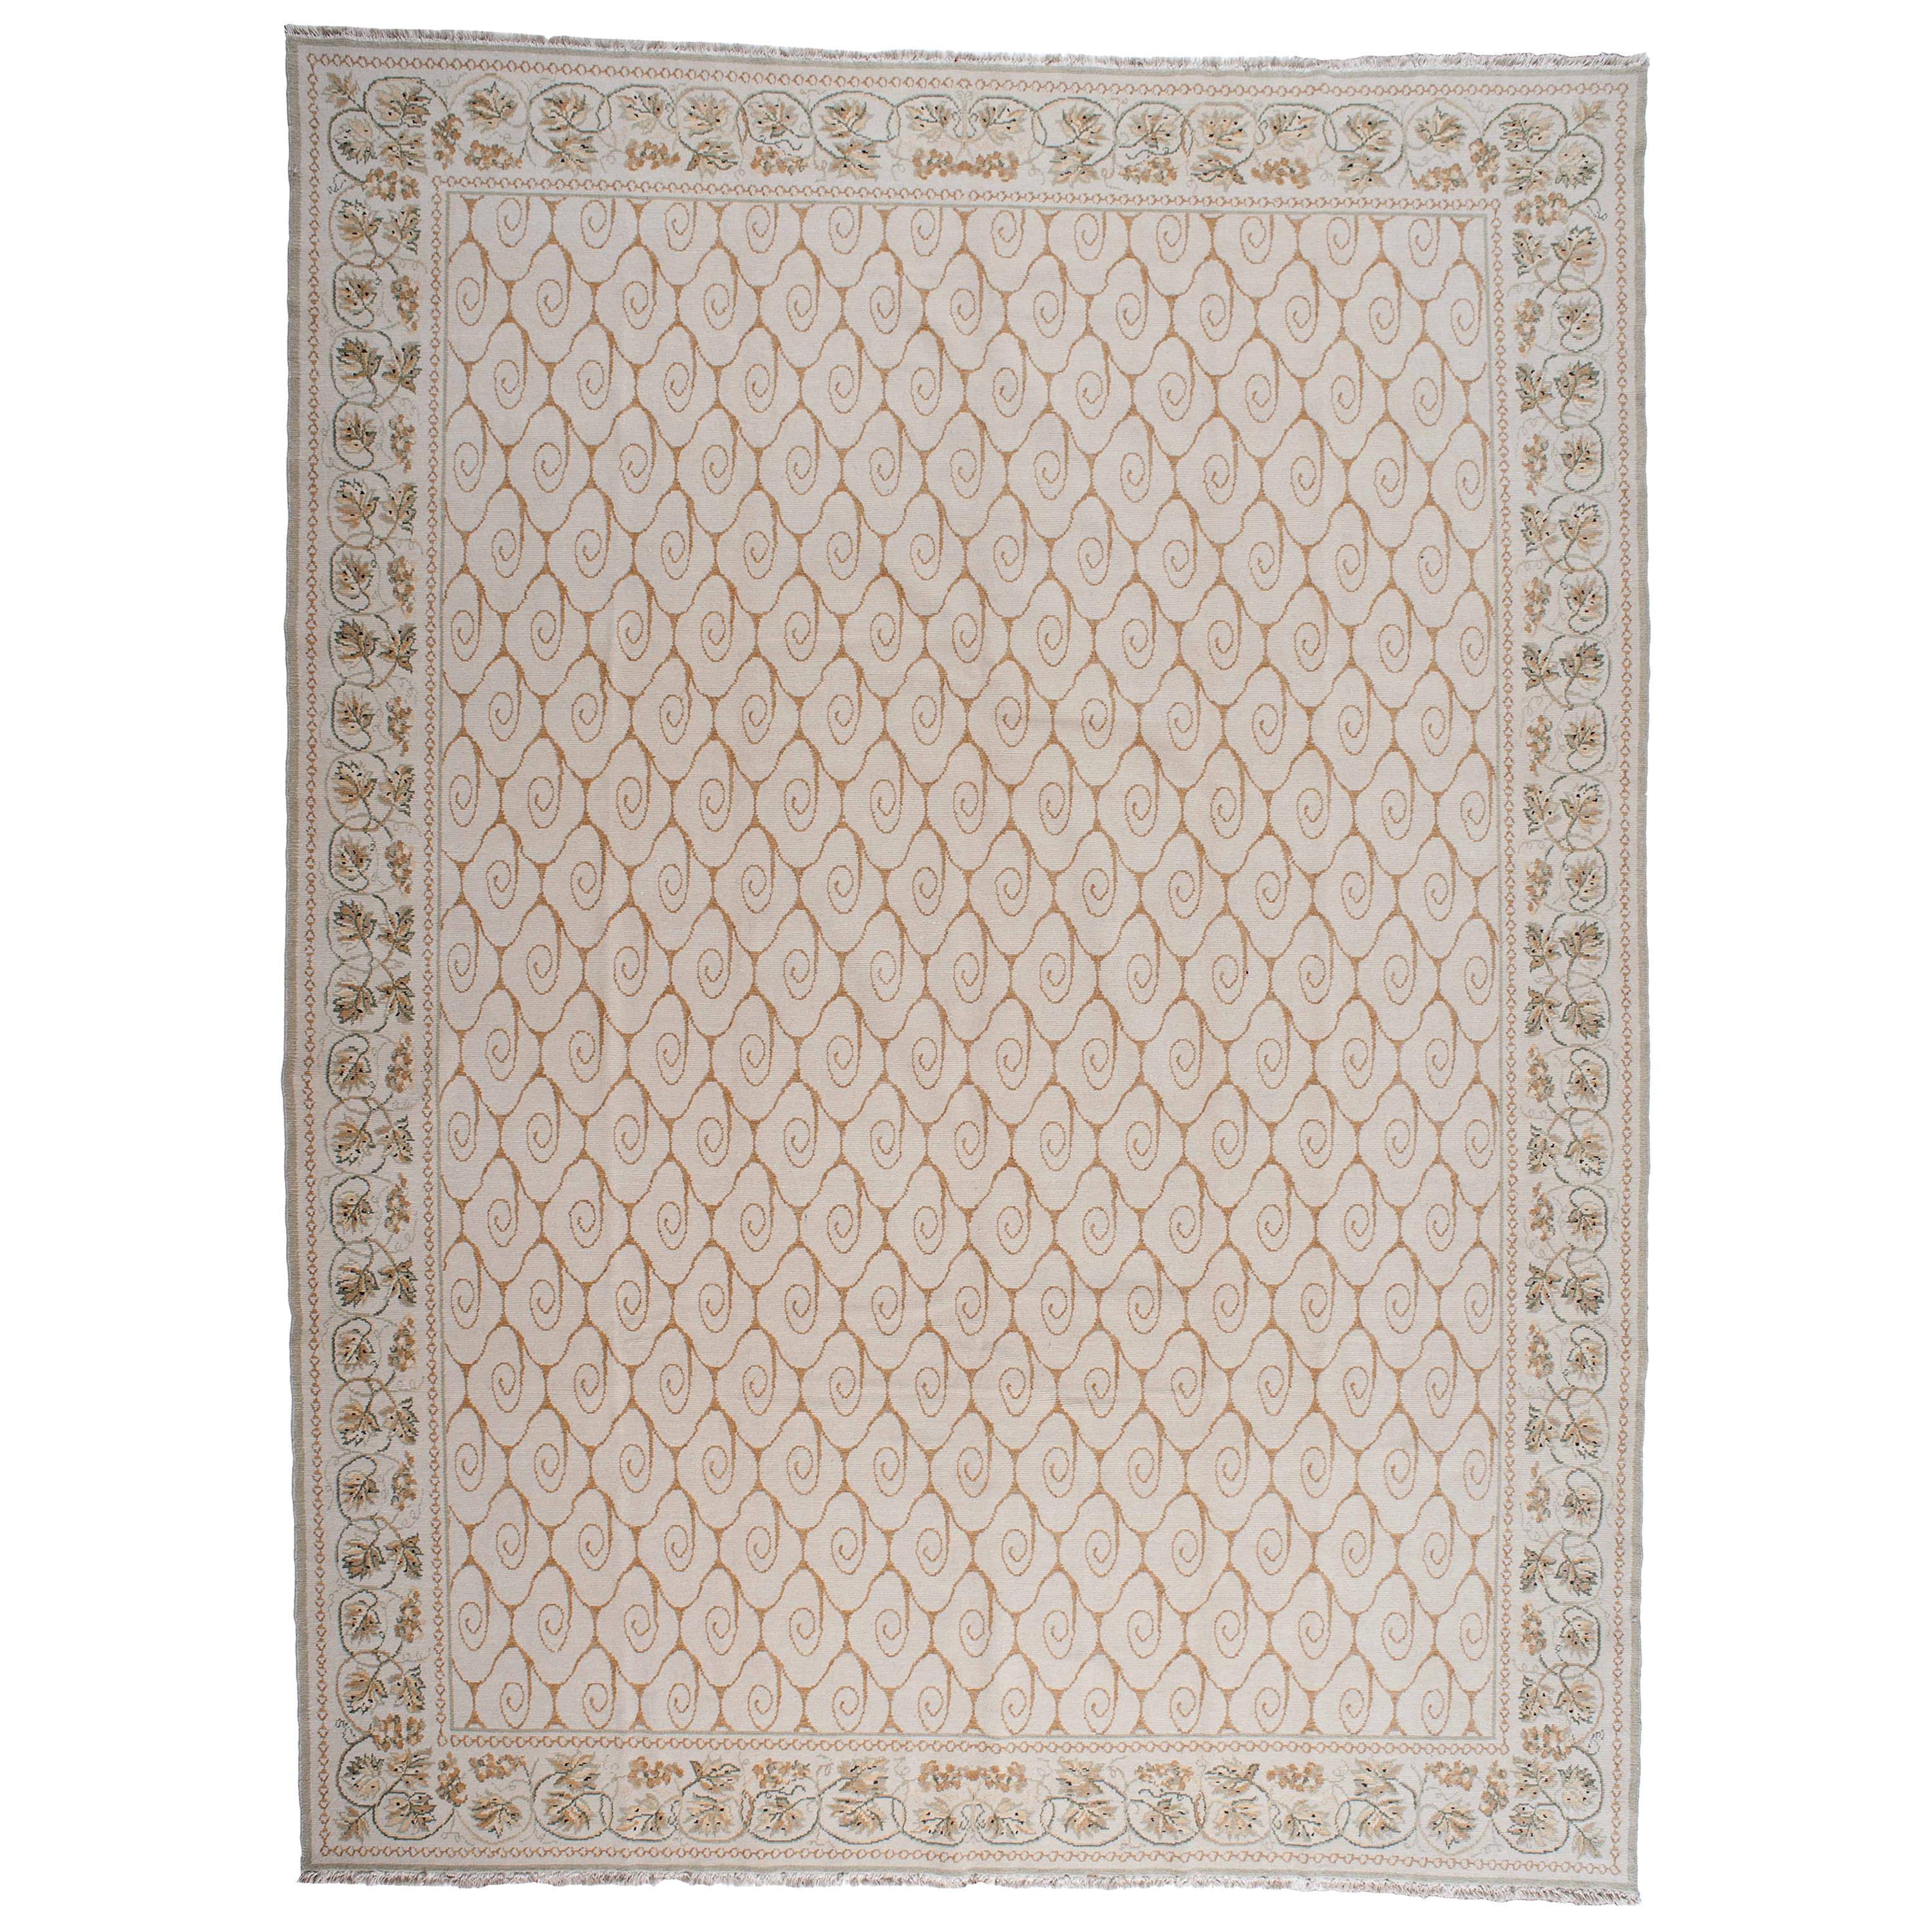 Beige Leaves and Lines Area Rug For Sale